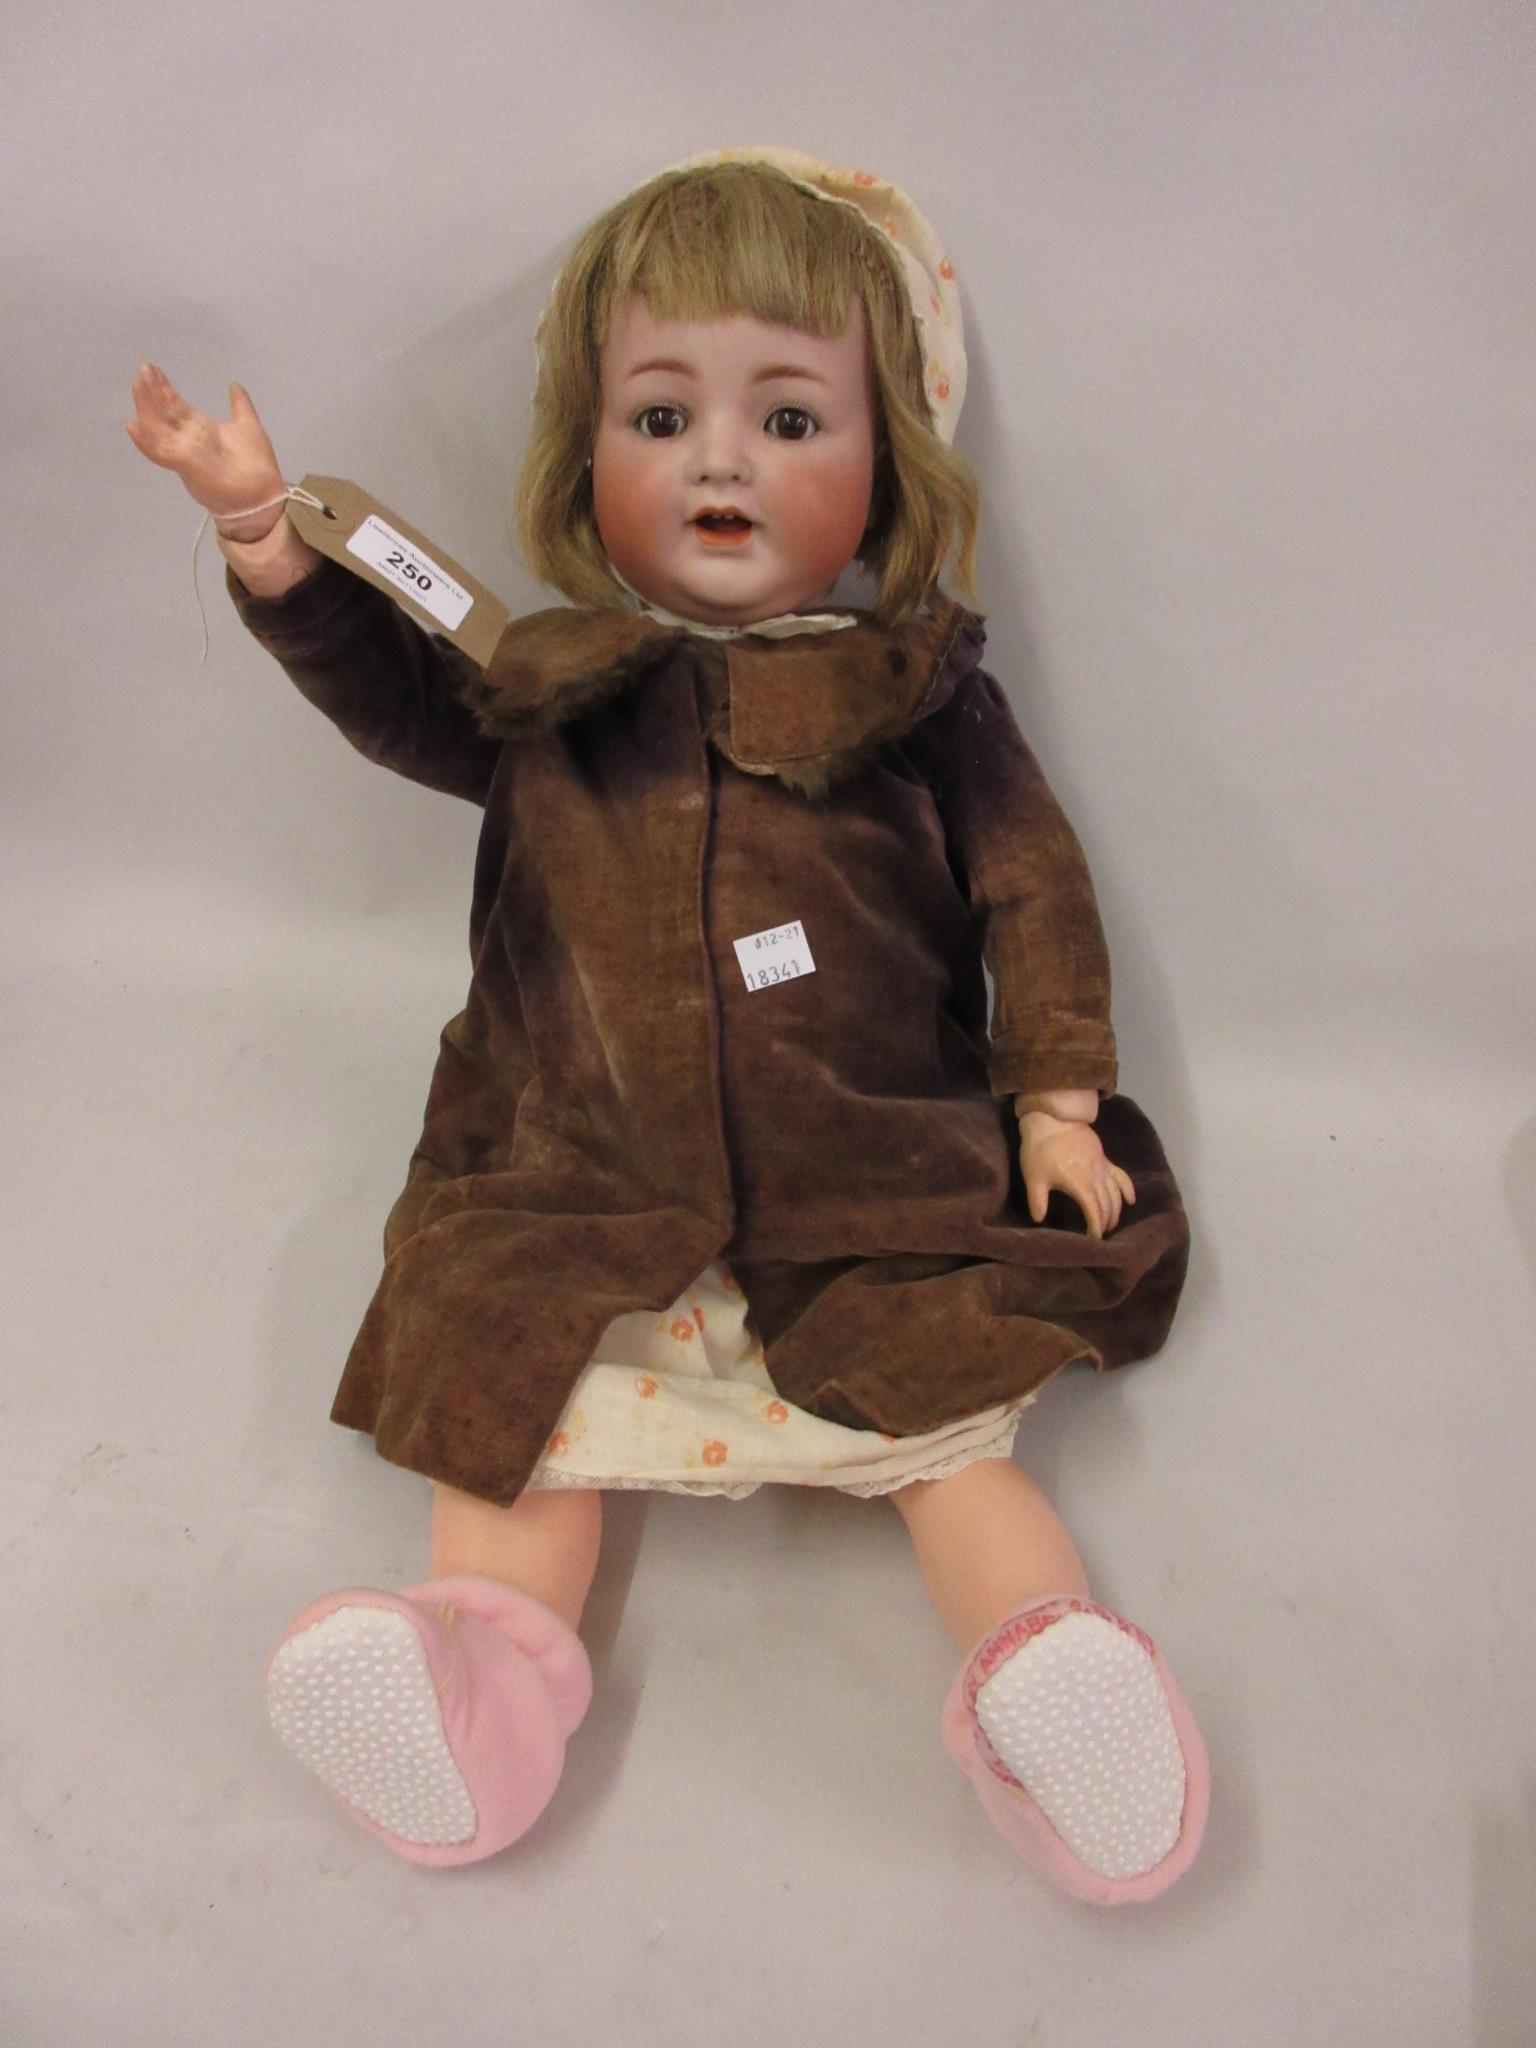 Simon & Halbig, German bisque headed doll with sleeping eyes, open mouth and two teeth on a